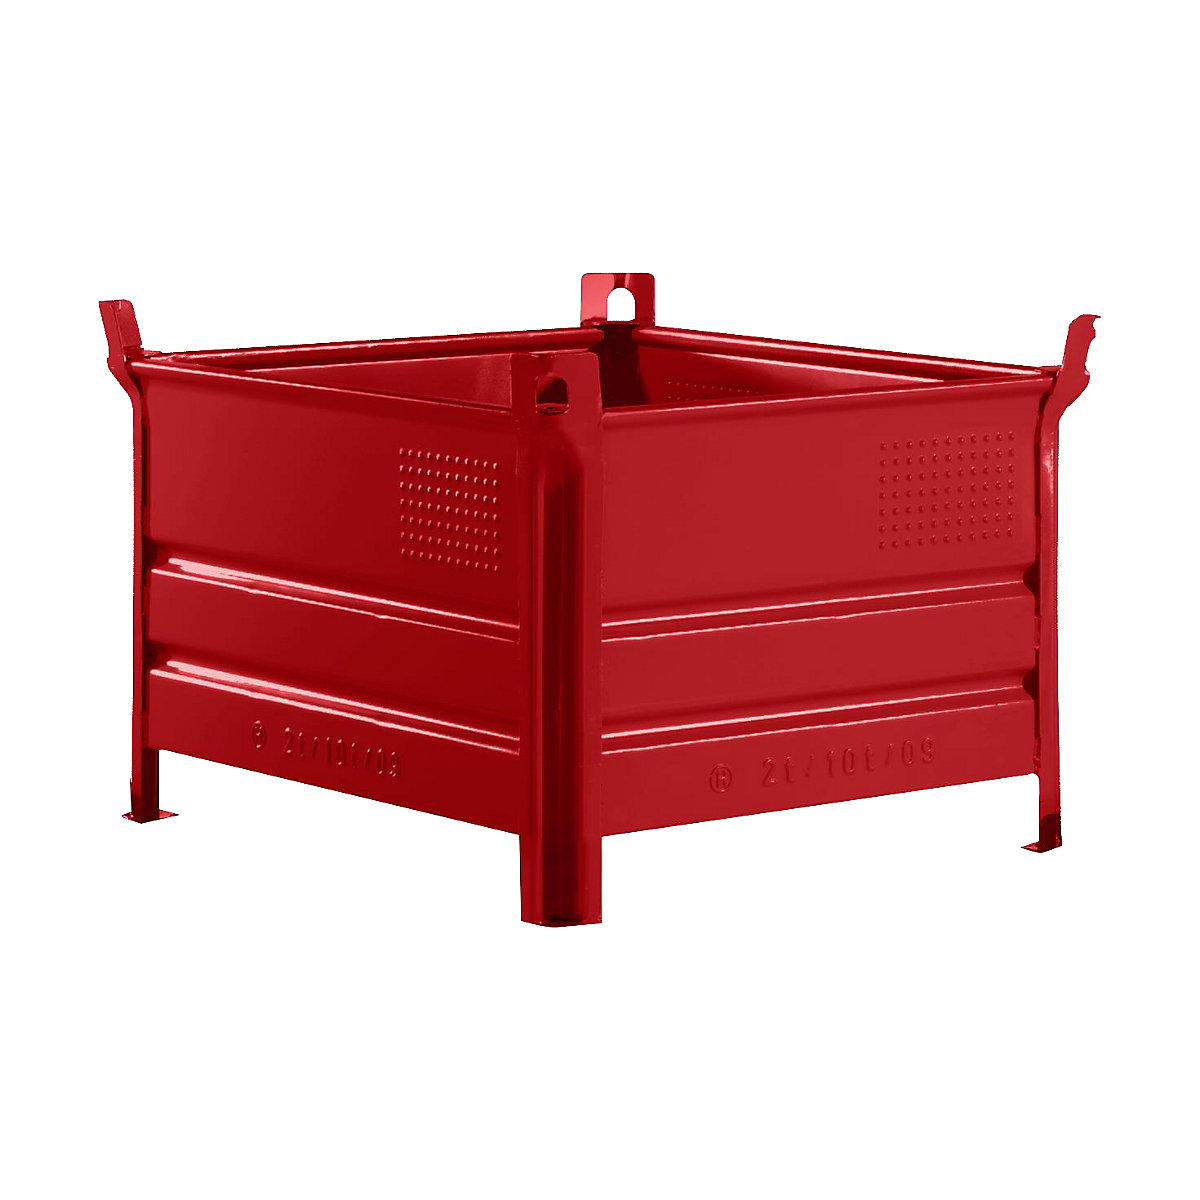 Stacking container with runners – Heson, LxW 1000 x 800 mm, max. load 2000 kg, red, 10+ items-4